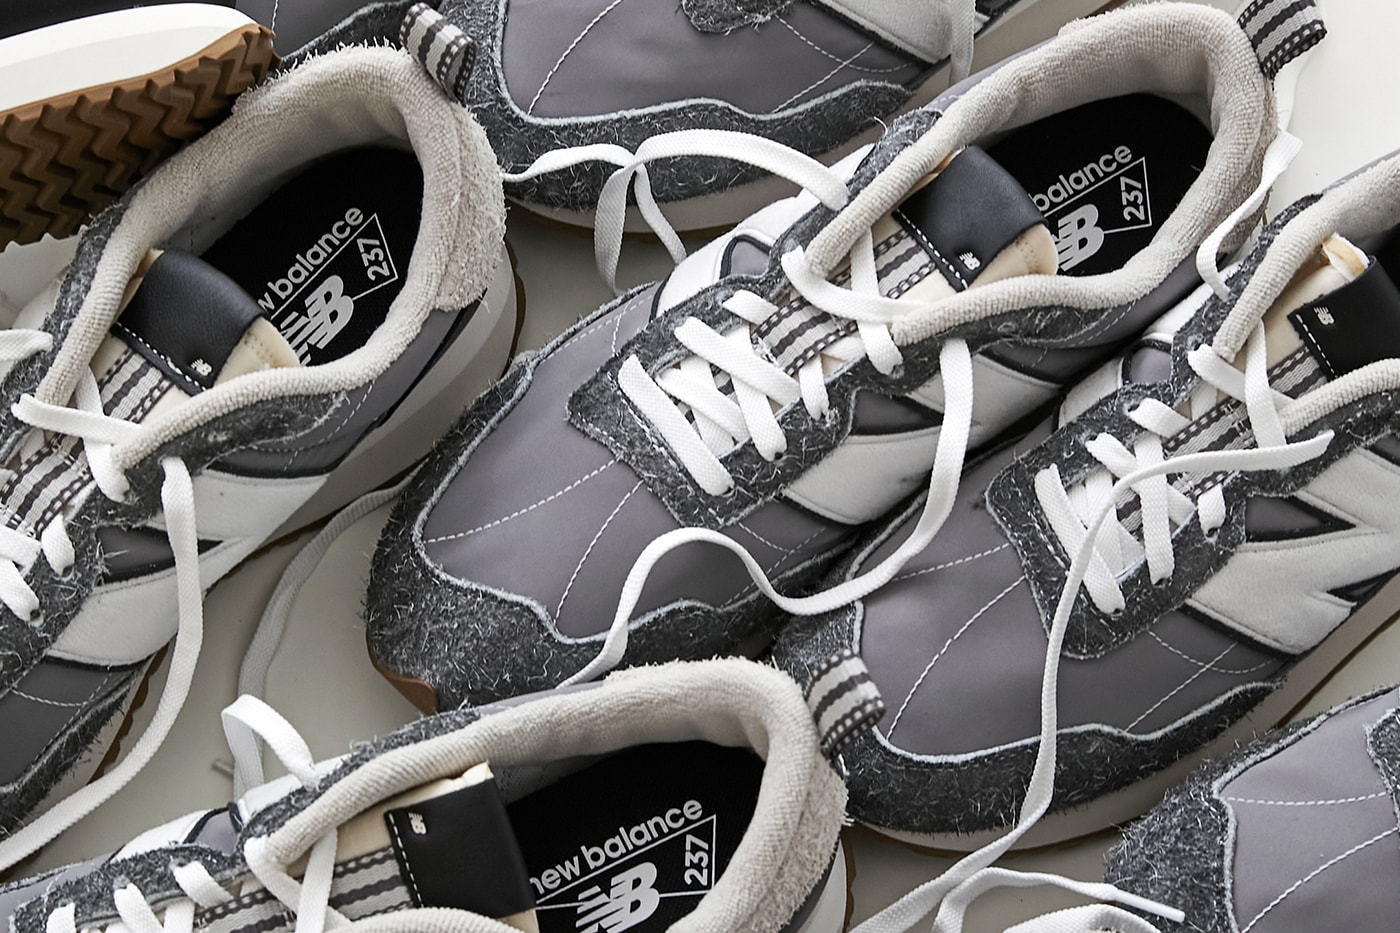 Todd Snyder New Balance 237 Collaboration city gym gray waffle 70s oversized n satin suede release info date price